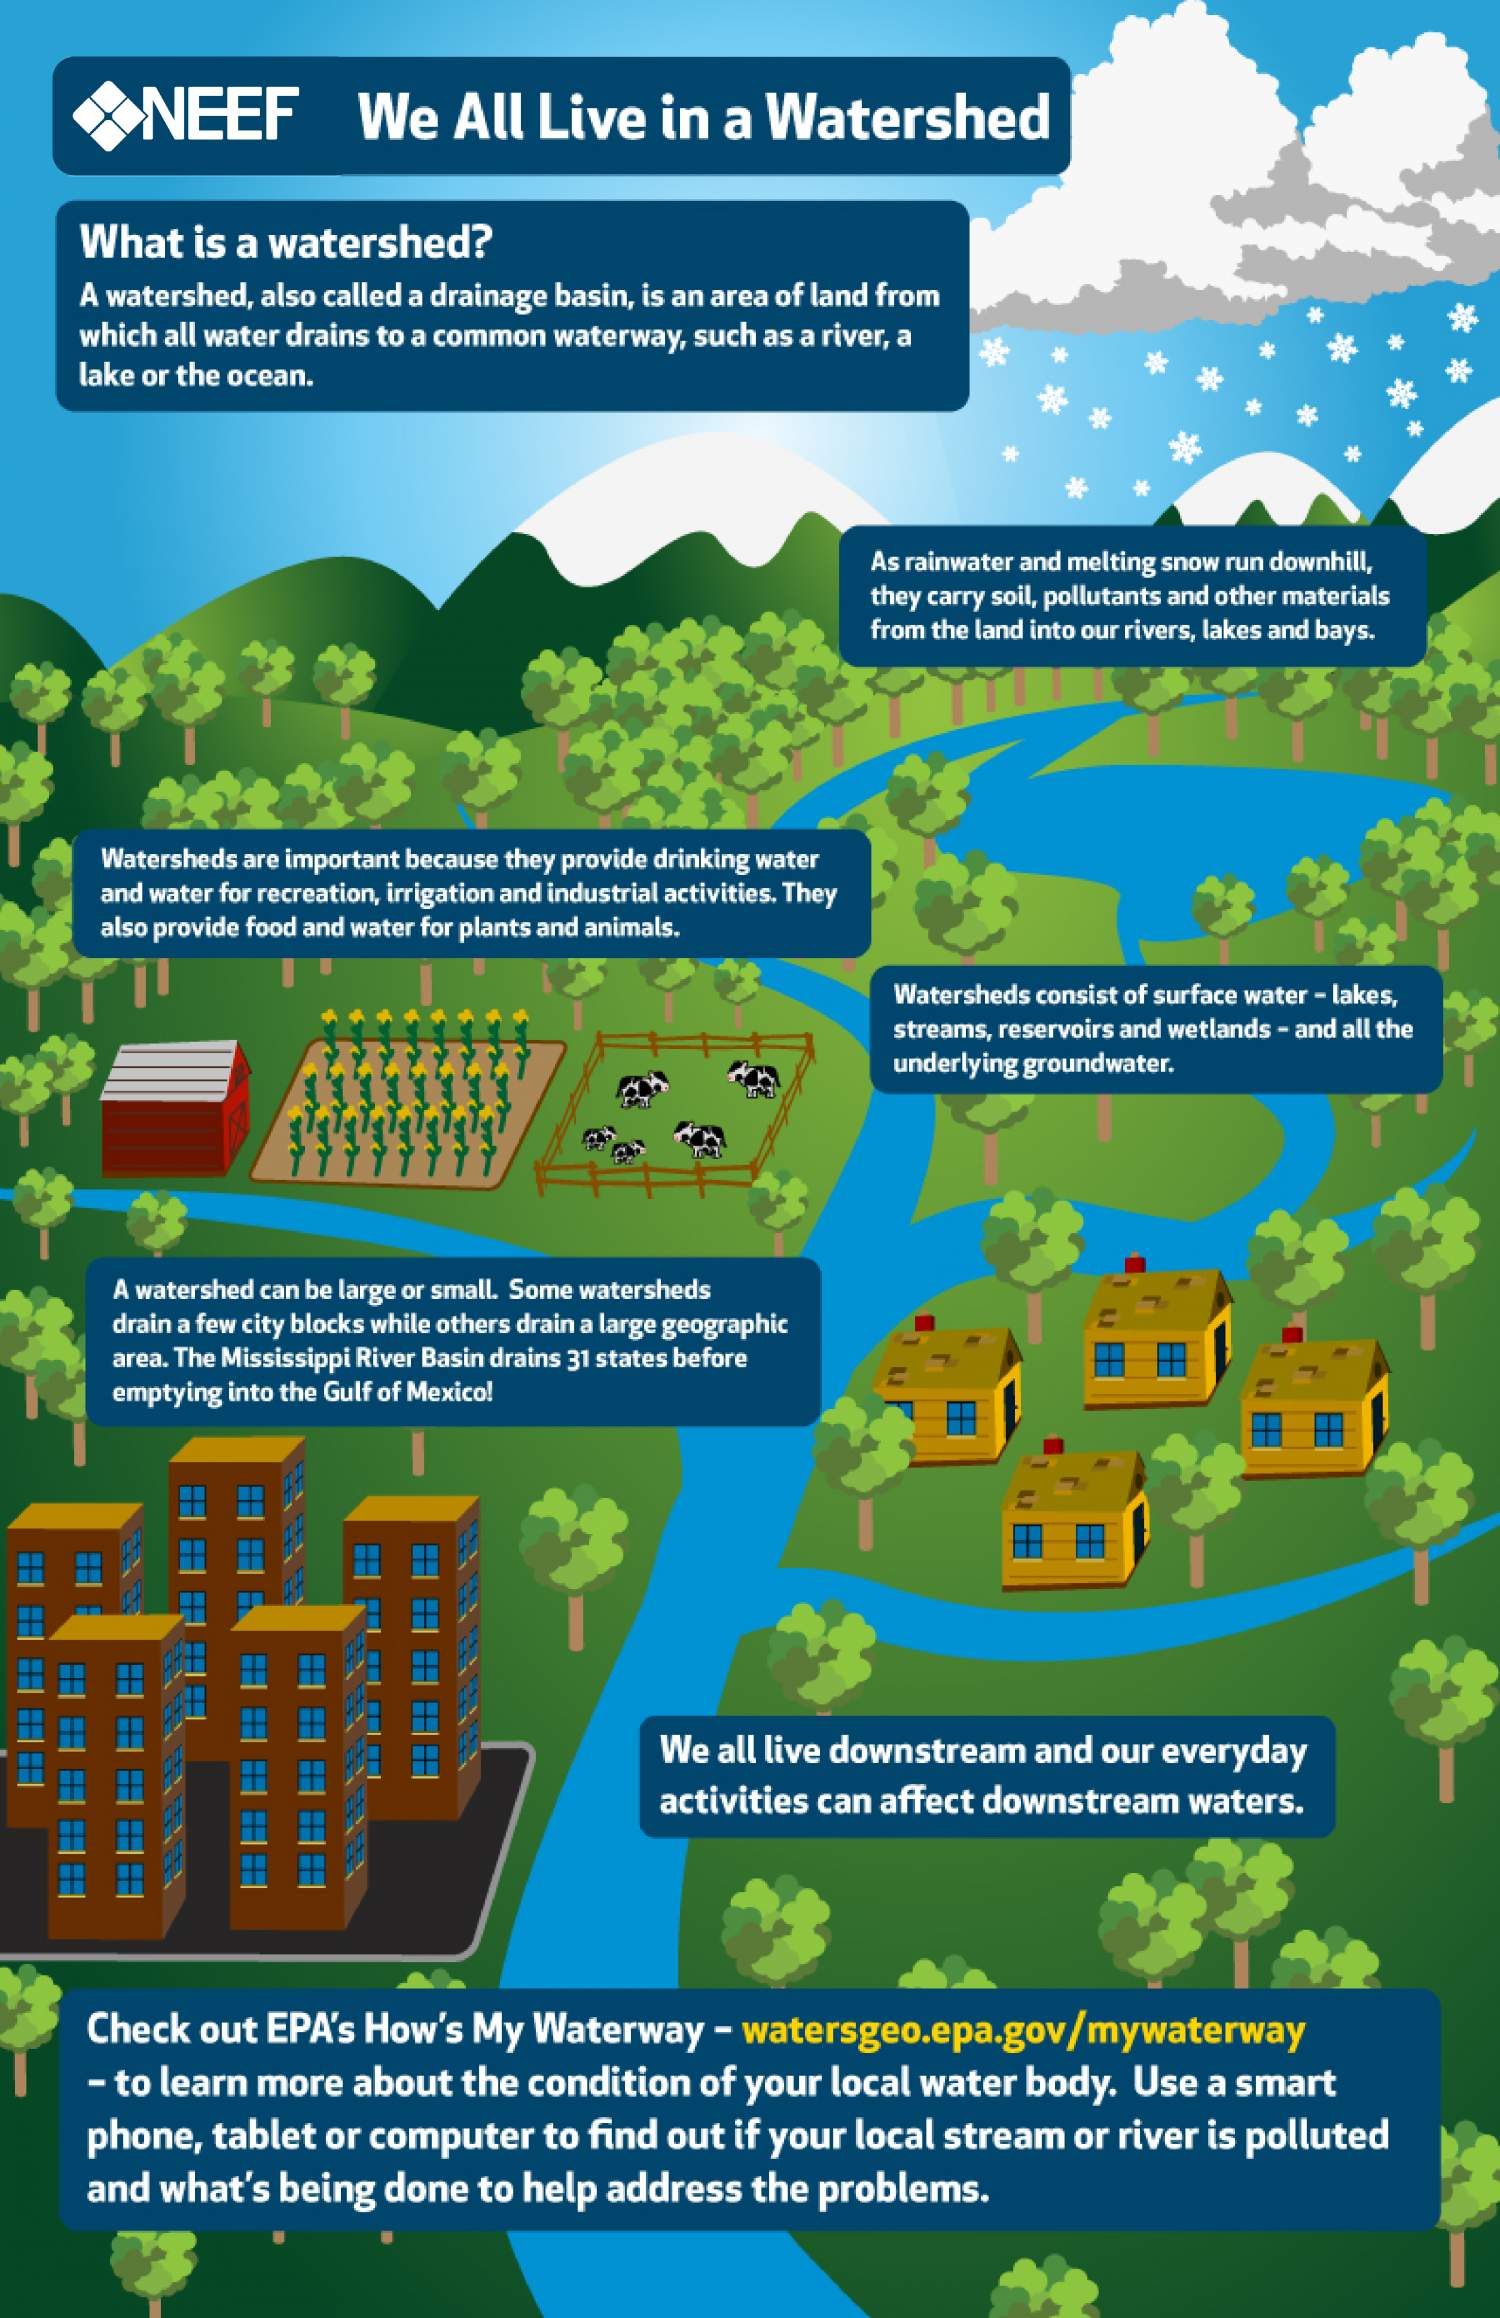 NEEF Infographic: We All Live in a Watershed